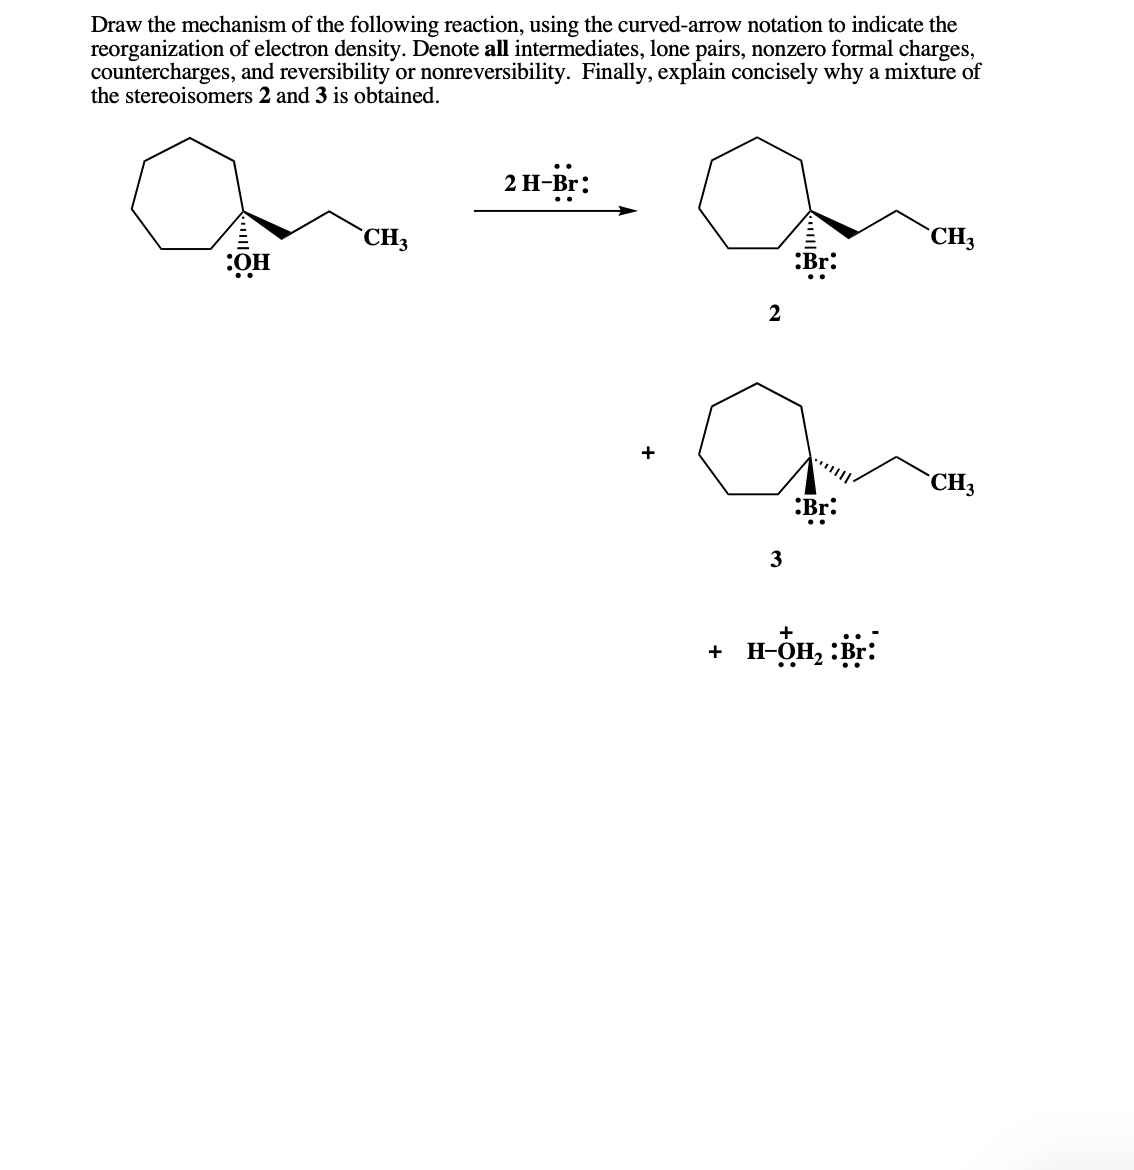 Draw the mechanism of the following reaction, using the curved-arrow notation to indicate the
reorganization of electron density. Denote all intermediates, lone pairs, nonzero formal charges,
countercharges, and reversibility or nonreversibility. Finally, explain concisely why a mixture of
the stereoisomers 2 and 3 is obtained.
2 H-Br:
`CH3
`CH3
:OH
:Br:
+
`CH3
:Br:
..
3
+
+ H-OH, :Br:
